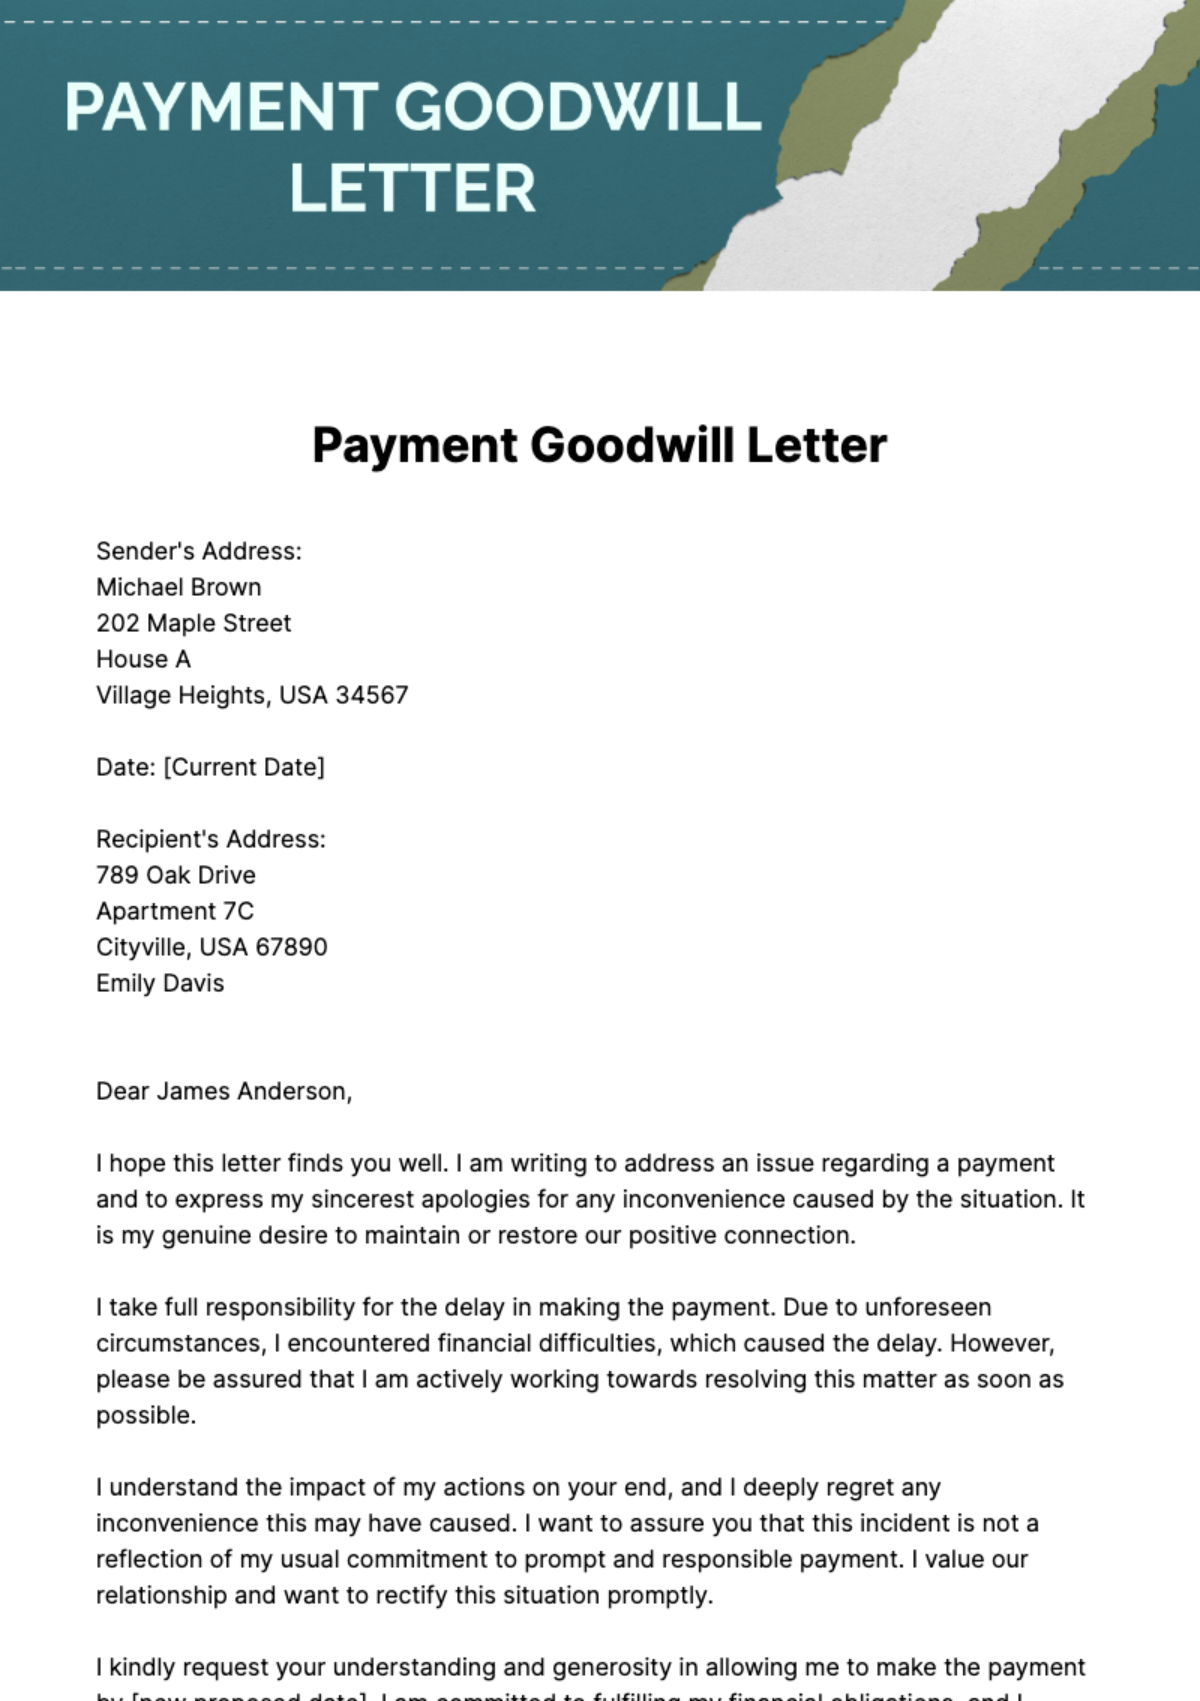 Payment Goodwill Letter Template